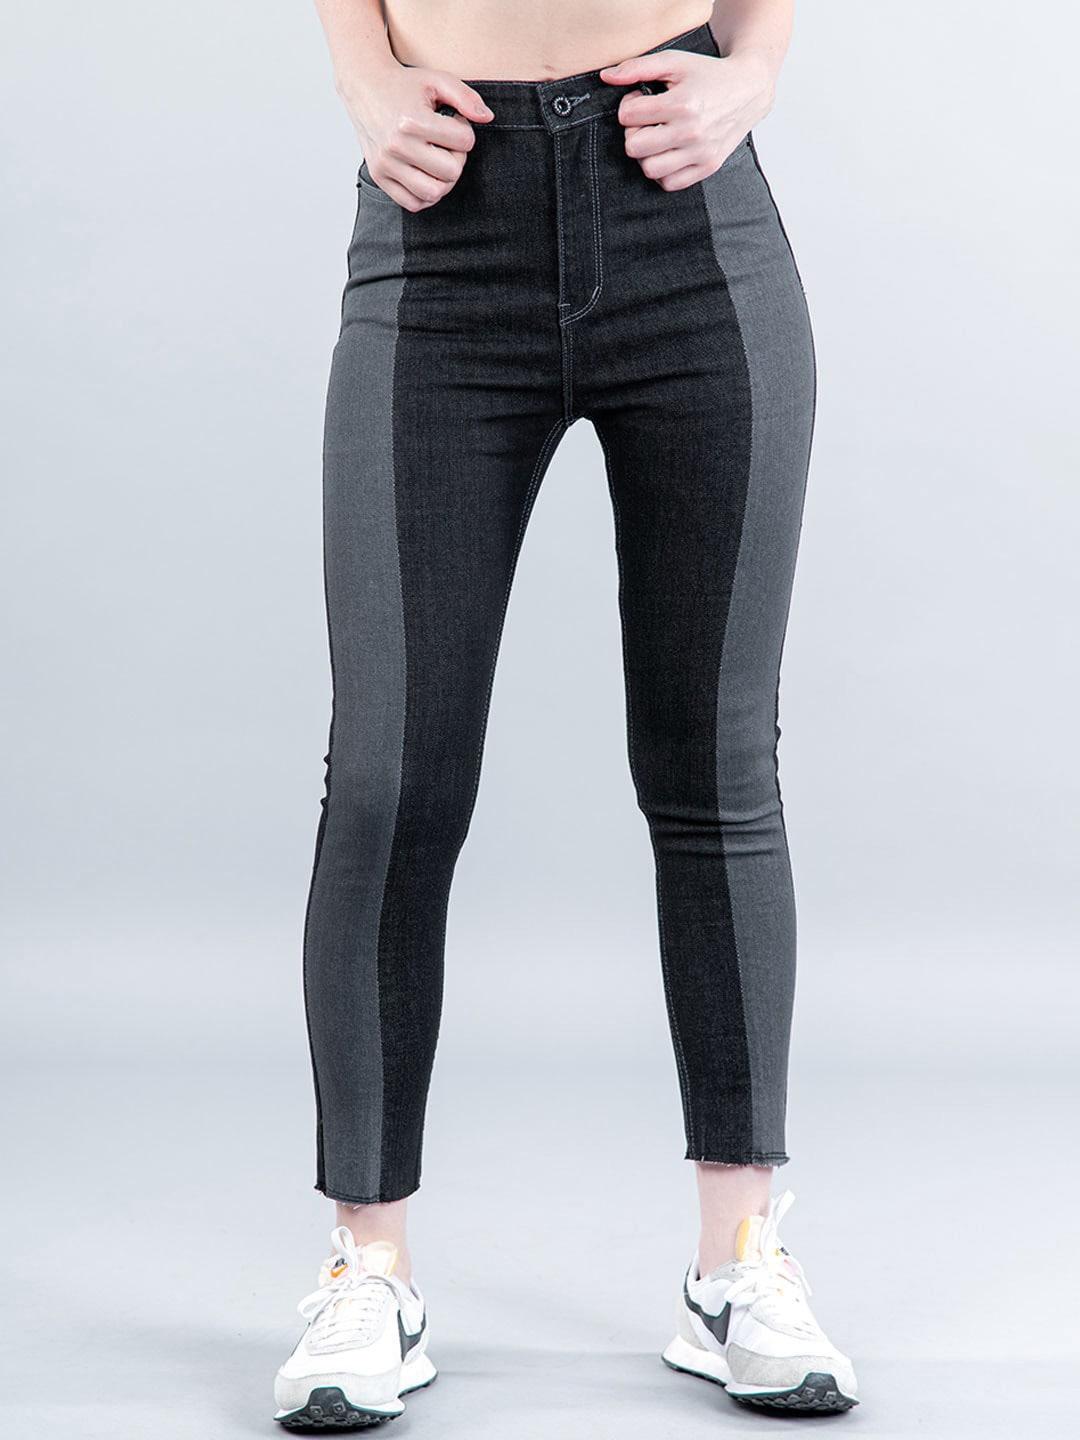 tistabene-women-comfort-skinny-fit-mid-rise-clean-look-stretchable-cropped-jeans